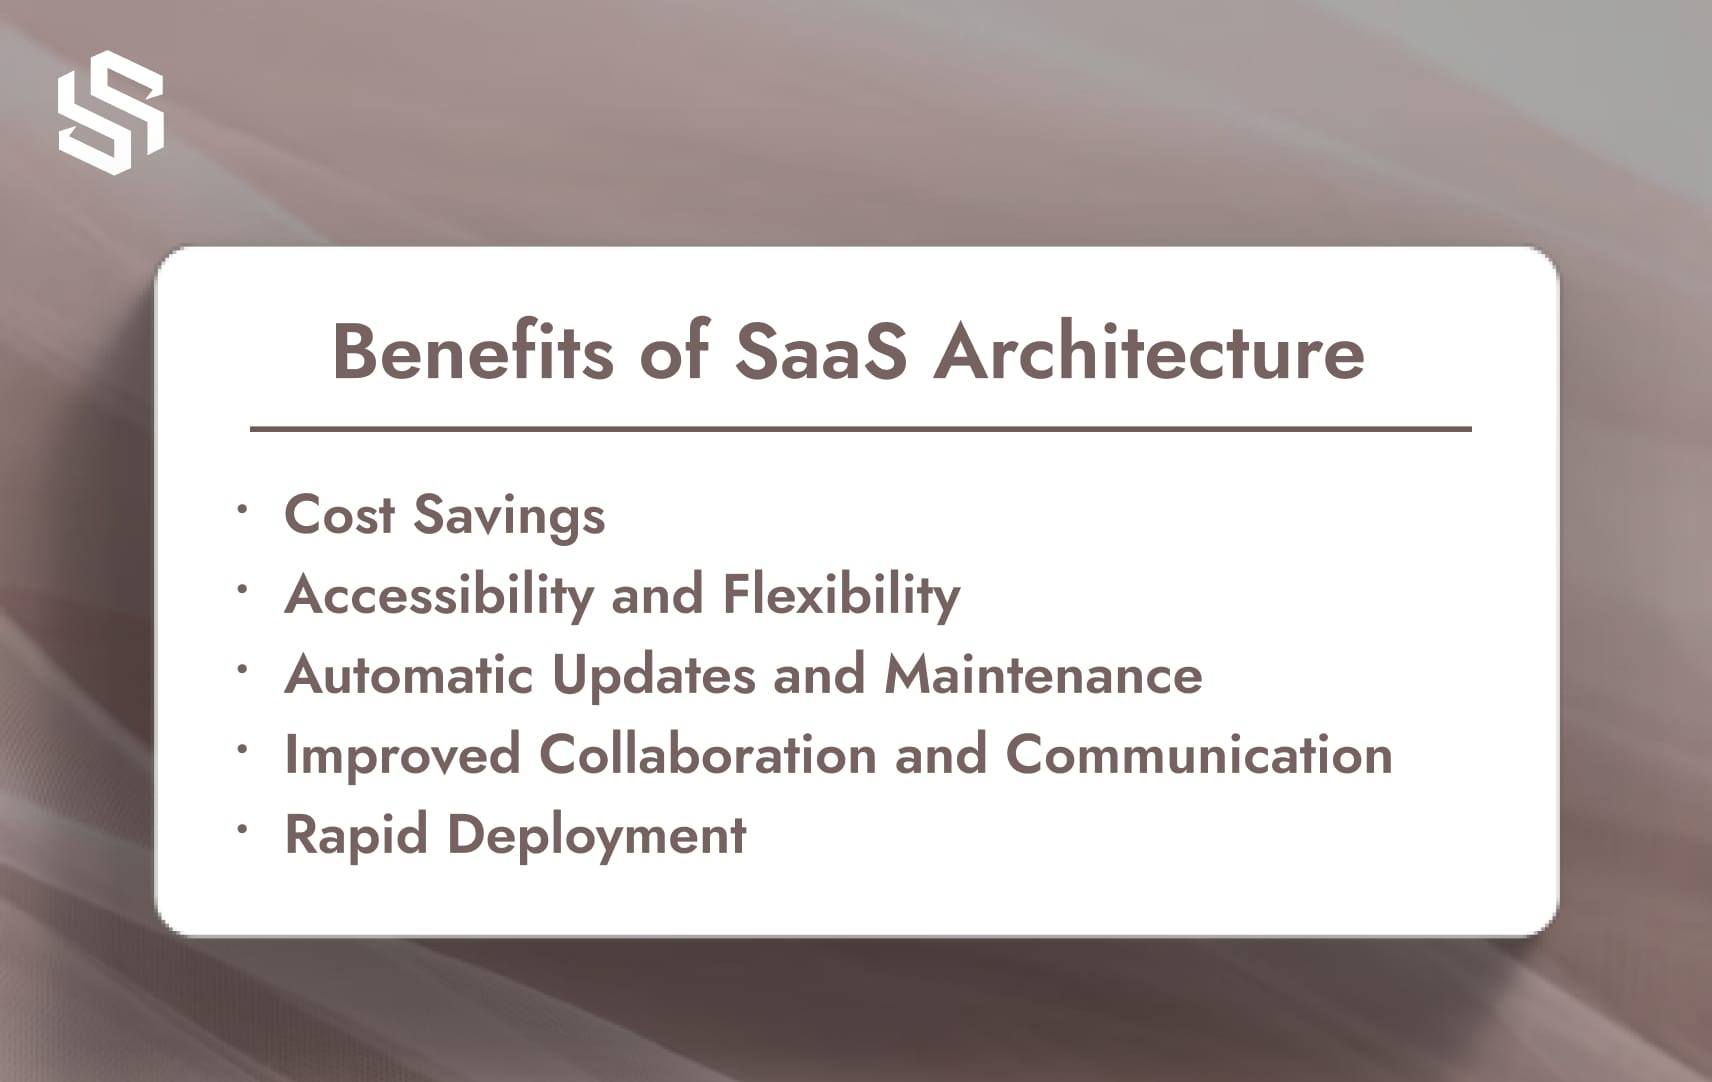 Benefits of SaaS Architecture